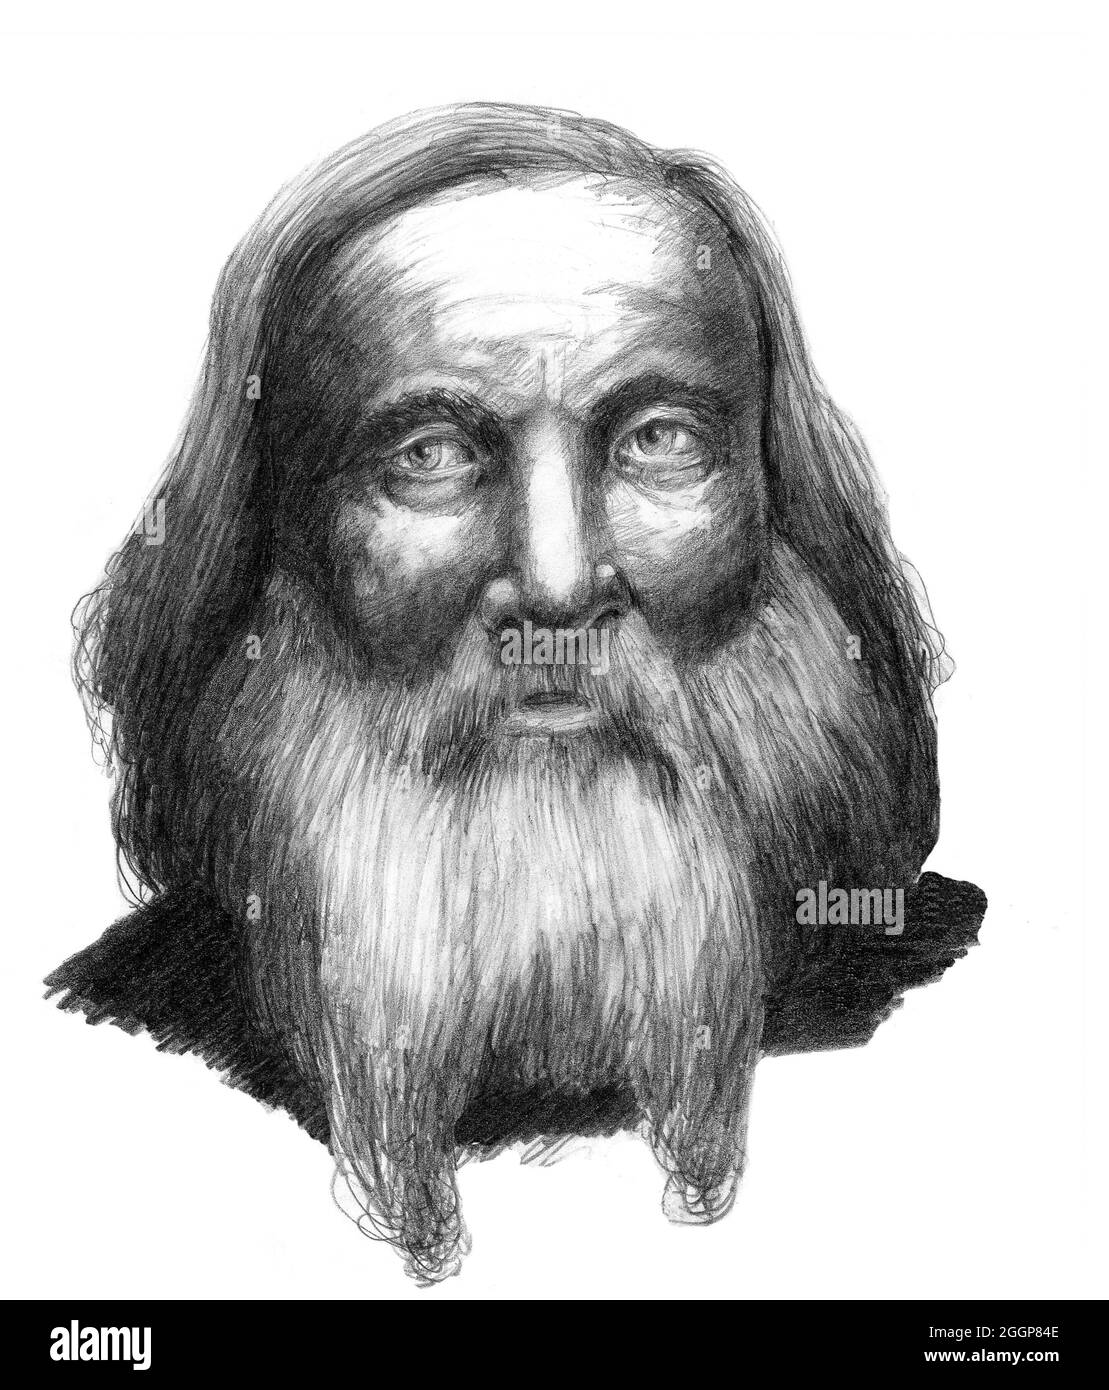 Illustration of Dmitry Ivanovich Mendeleyev (1834-1907), Russian chemist. Mendeleyev (or Mendeleev) was initially an indifferent student, but left college at the top of his class. After attending the 1st Karlsruhe Congress (1860), Mendelayev worked on organizing trends in atomic weights and valency. From this, he developed the first true periodic table of the elements (final version published in 1871). This contained some gaps, but as new elements were discovered to have the properties predicted by the table, Mendeleyev became famous worldwide. Stock Photo